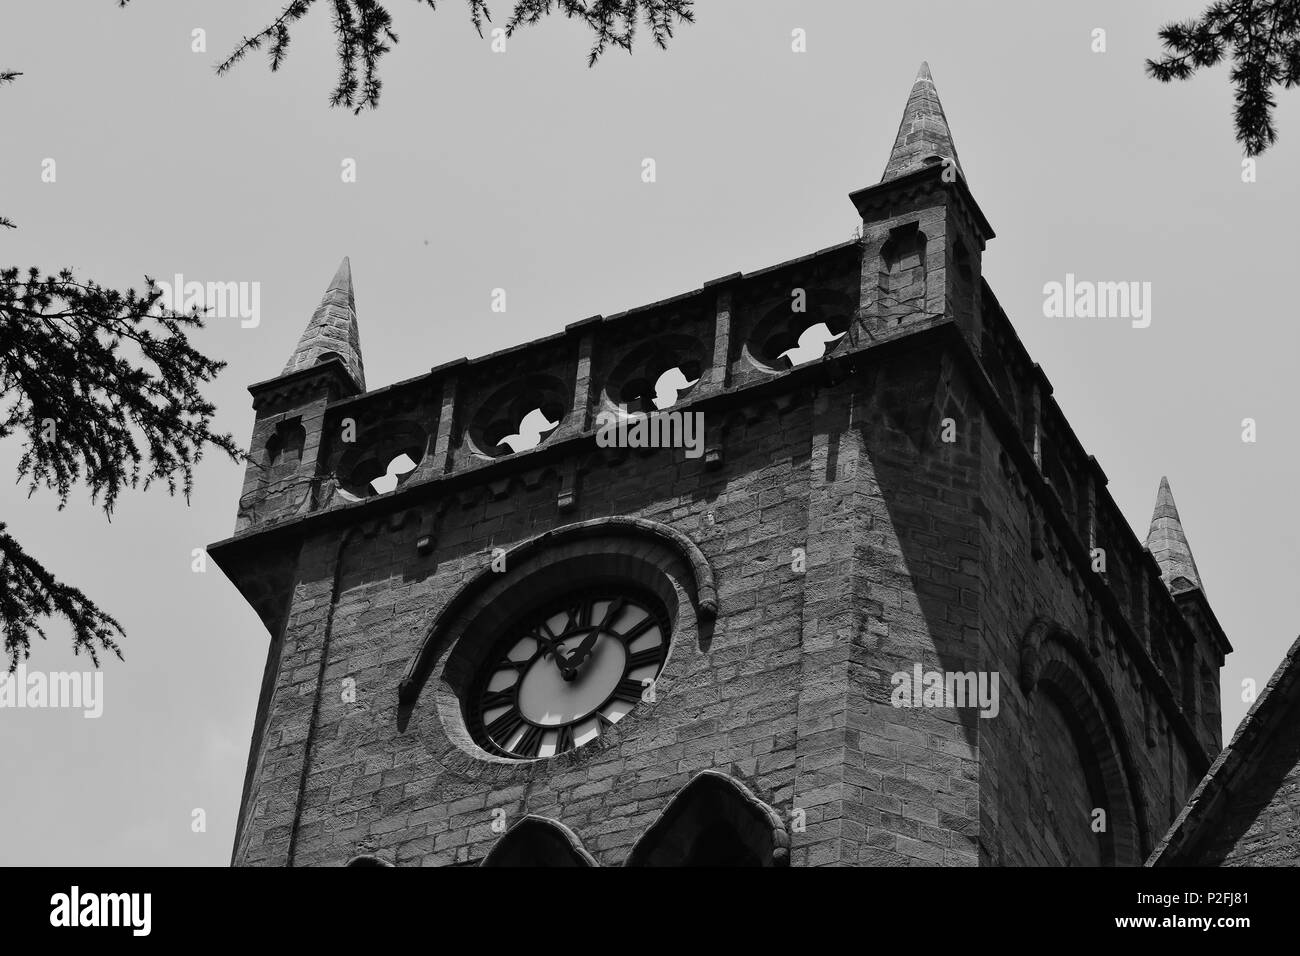 A 150 years old clock mounted on top of the Church of England or Christ Church, Himachal Pradesh, Kasauli, India. Stock Photo